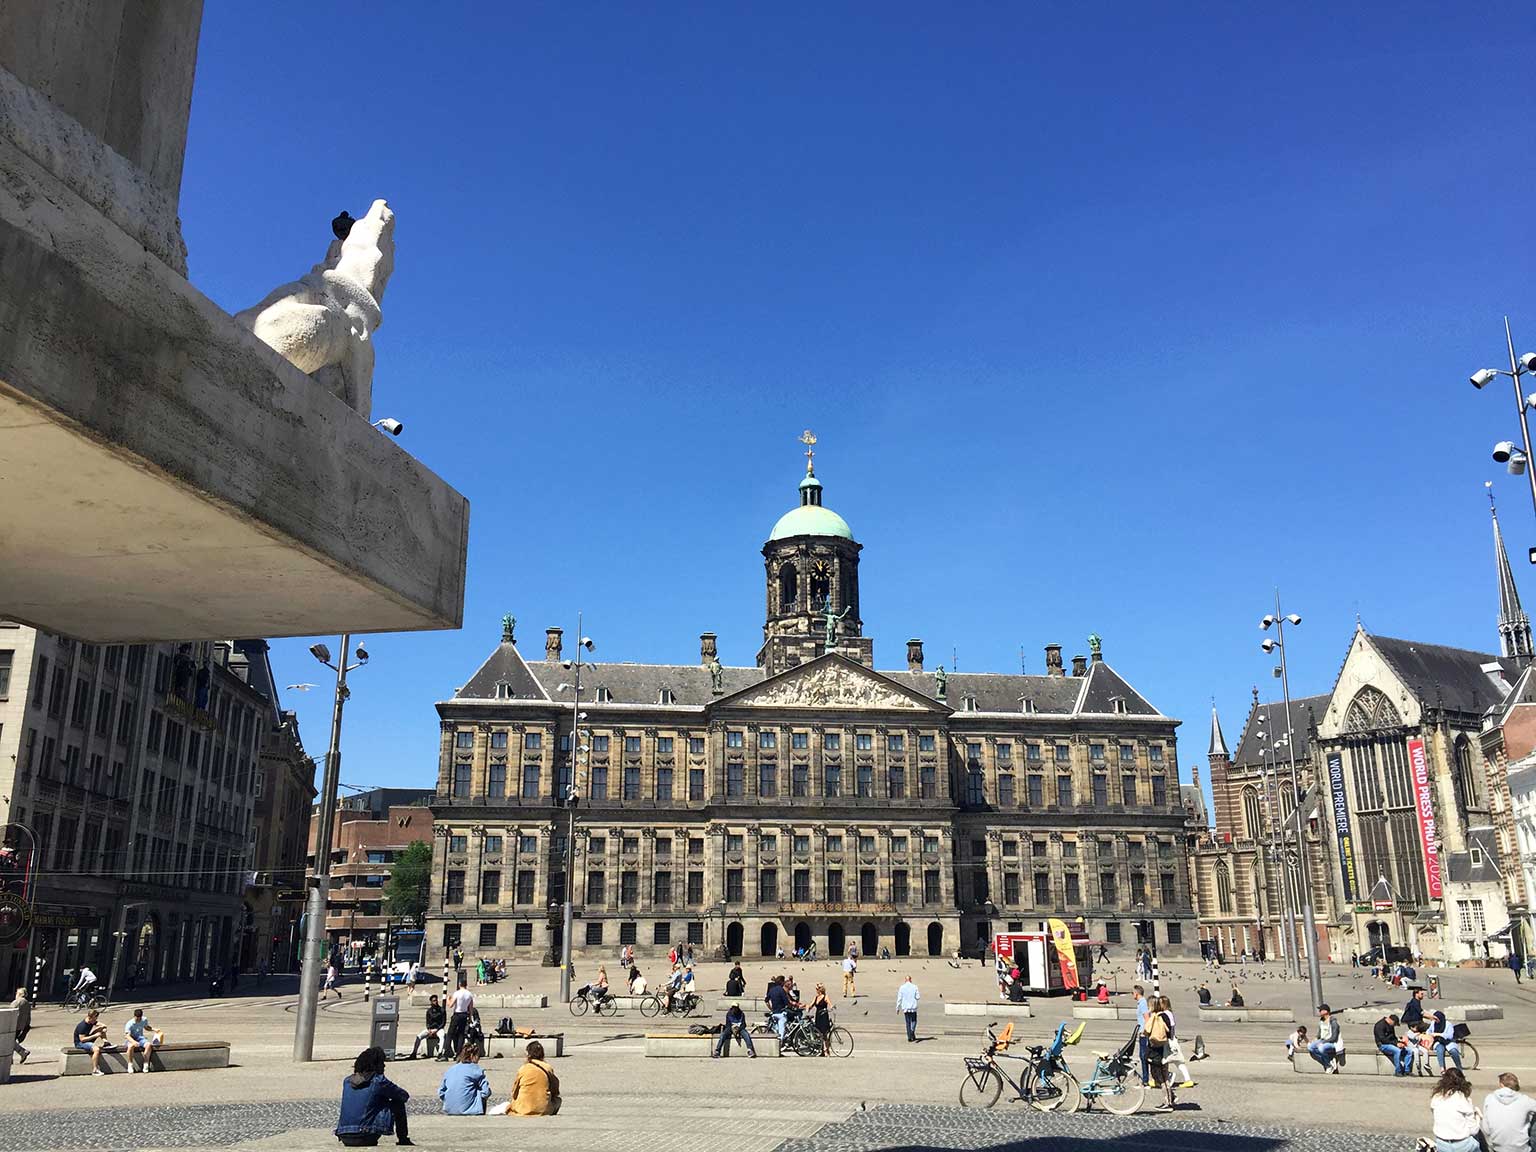 View of the Royal Palace on Dam square, Amsterdam